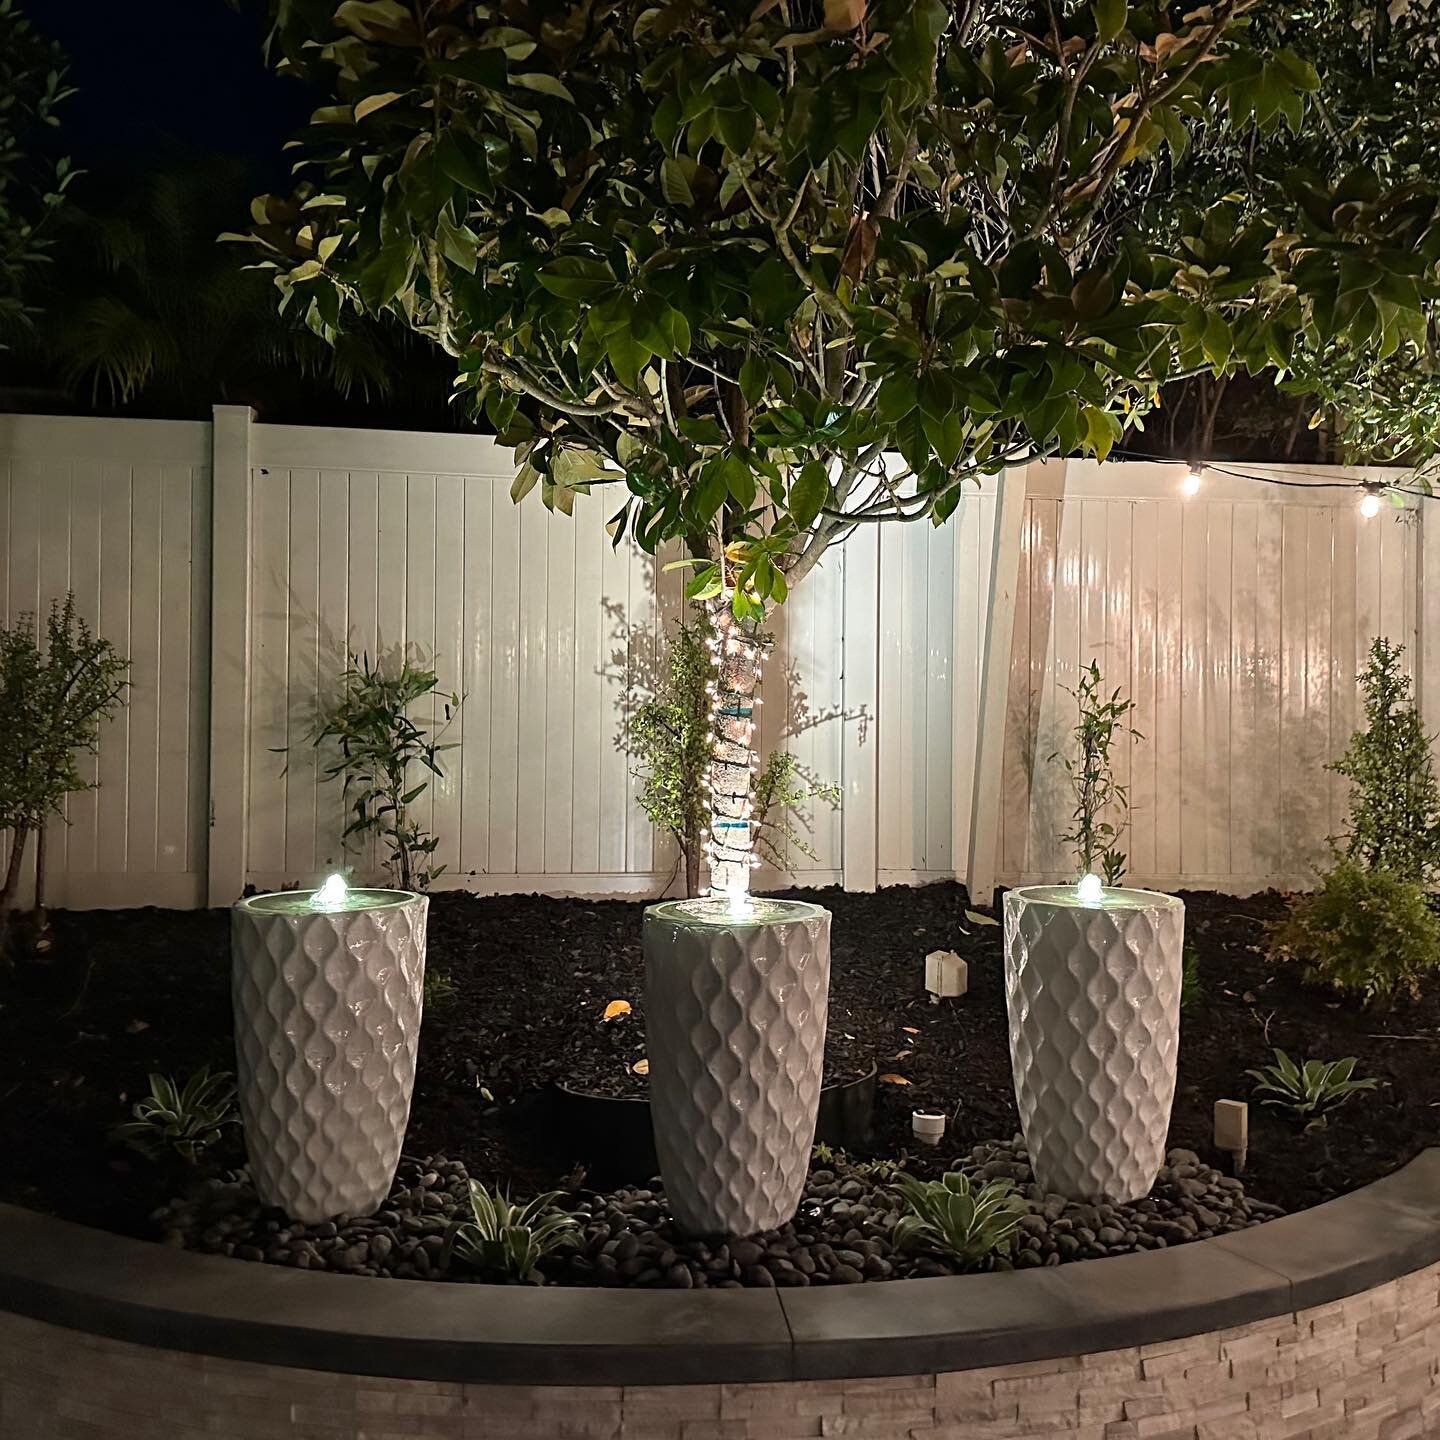 What&rsquo;s better than two? Three! A trio of pots or water features is the perfect way to draw attention to a focal point in your space. Come see us to choose the colors and designs that fit your taste. #paradisefountains #fountain #fountains #oc #